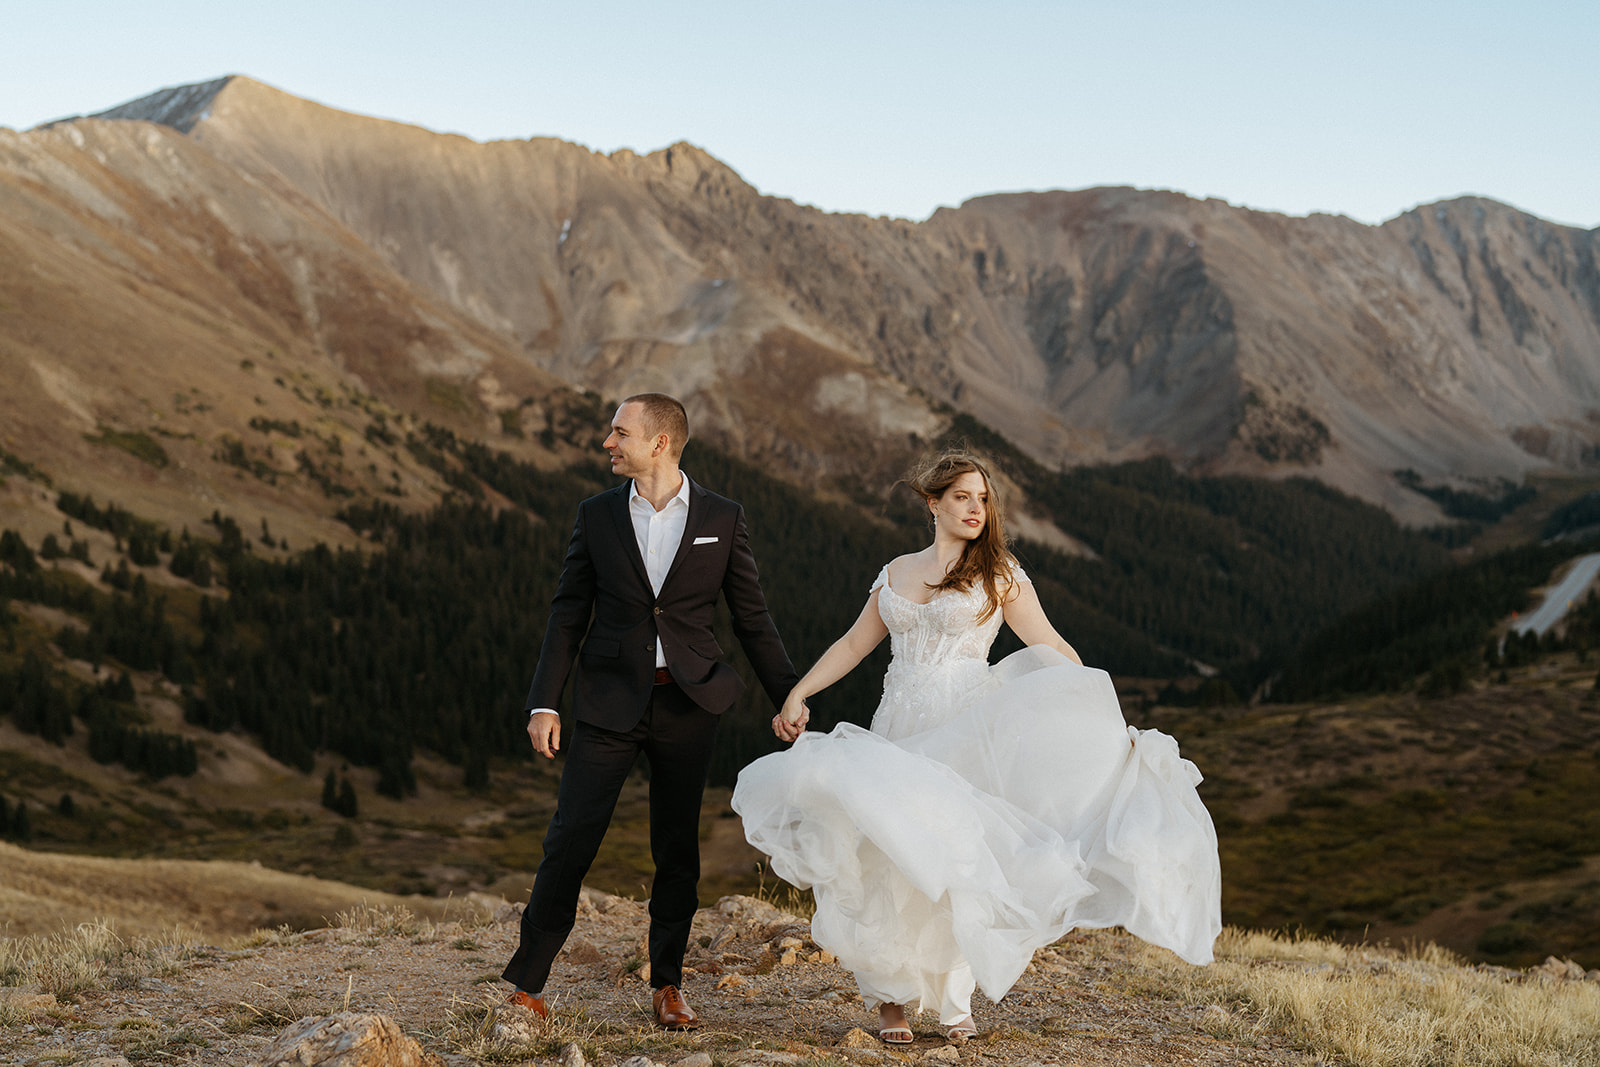 A bride plays in her lace dress with the wind while holding hands with her groom and standing in the remote mountains